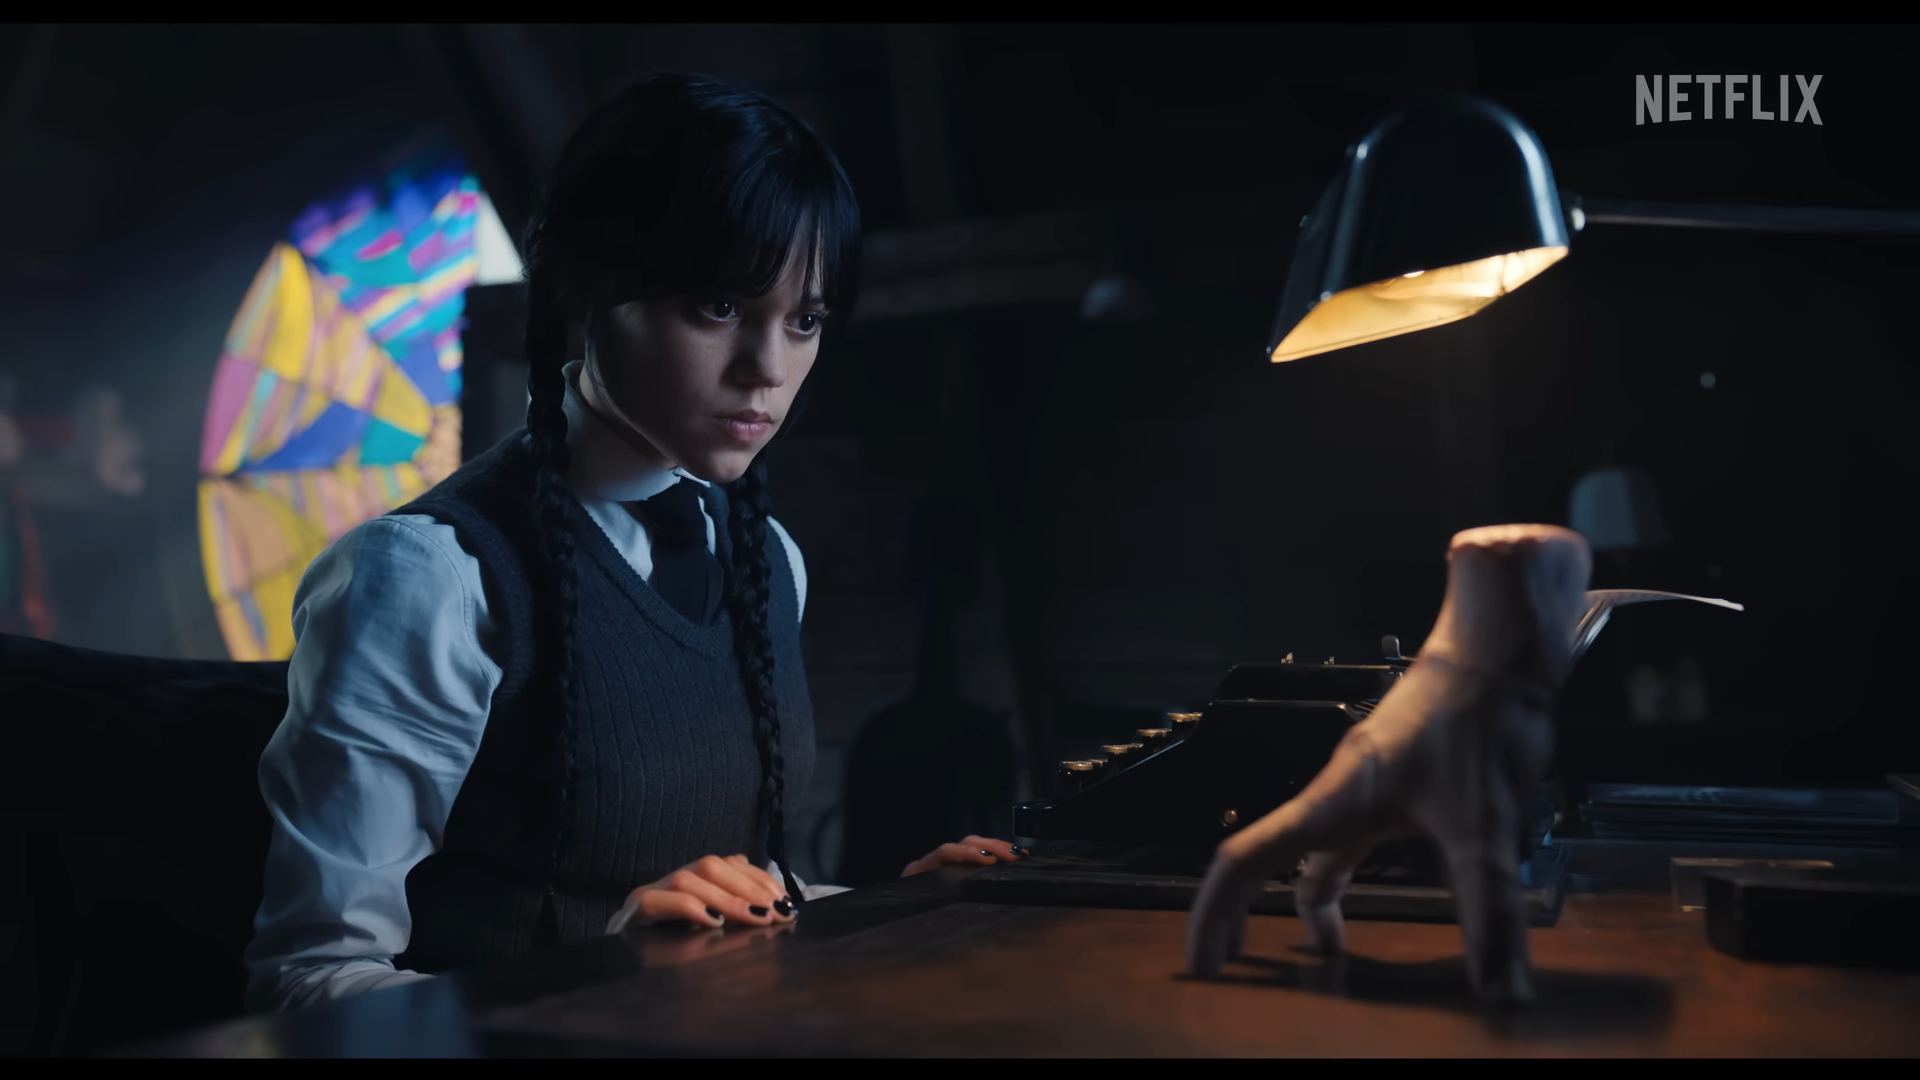 Check Out This New Clip From Tim Burton's Netflix Series “Wednesday” in Which Jenna Ortega Confronts “Thing” for Spying. Trevor Decker News